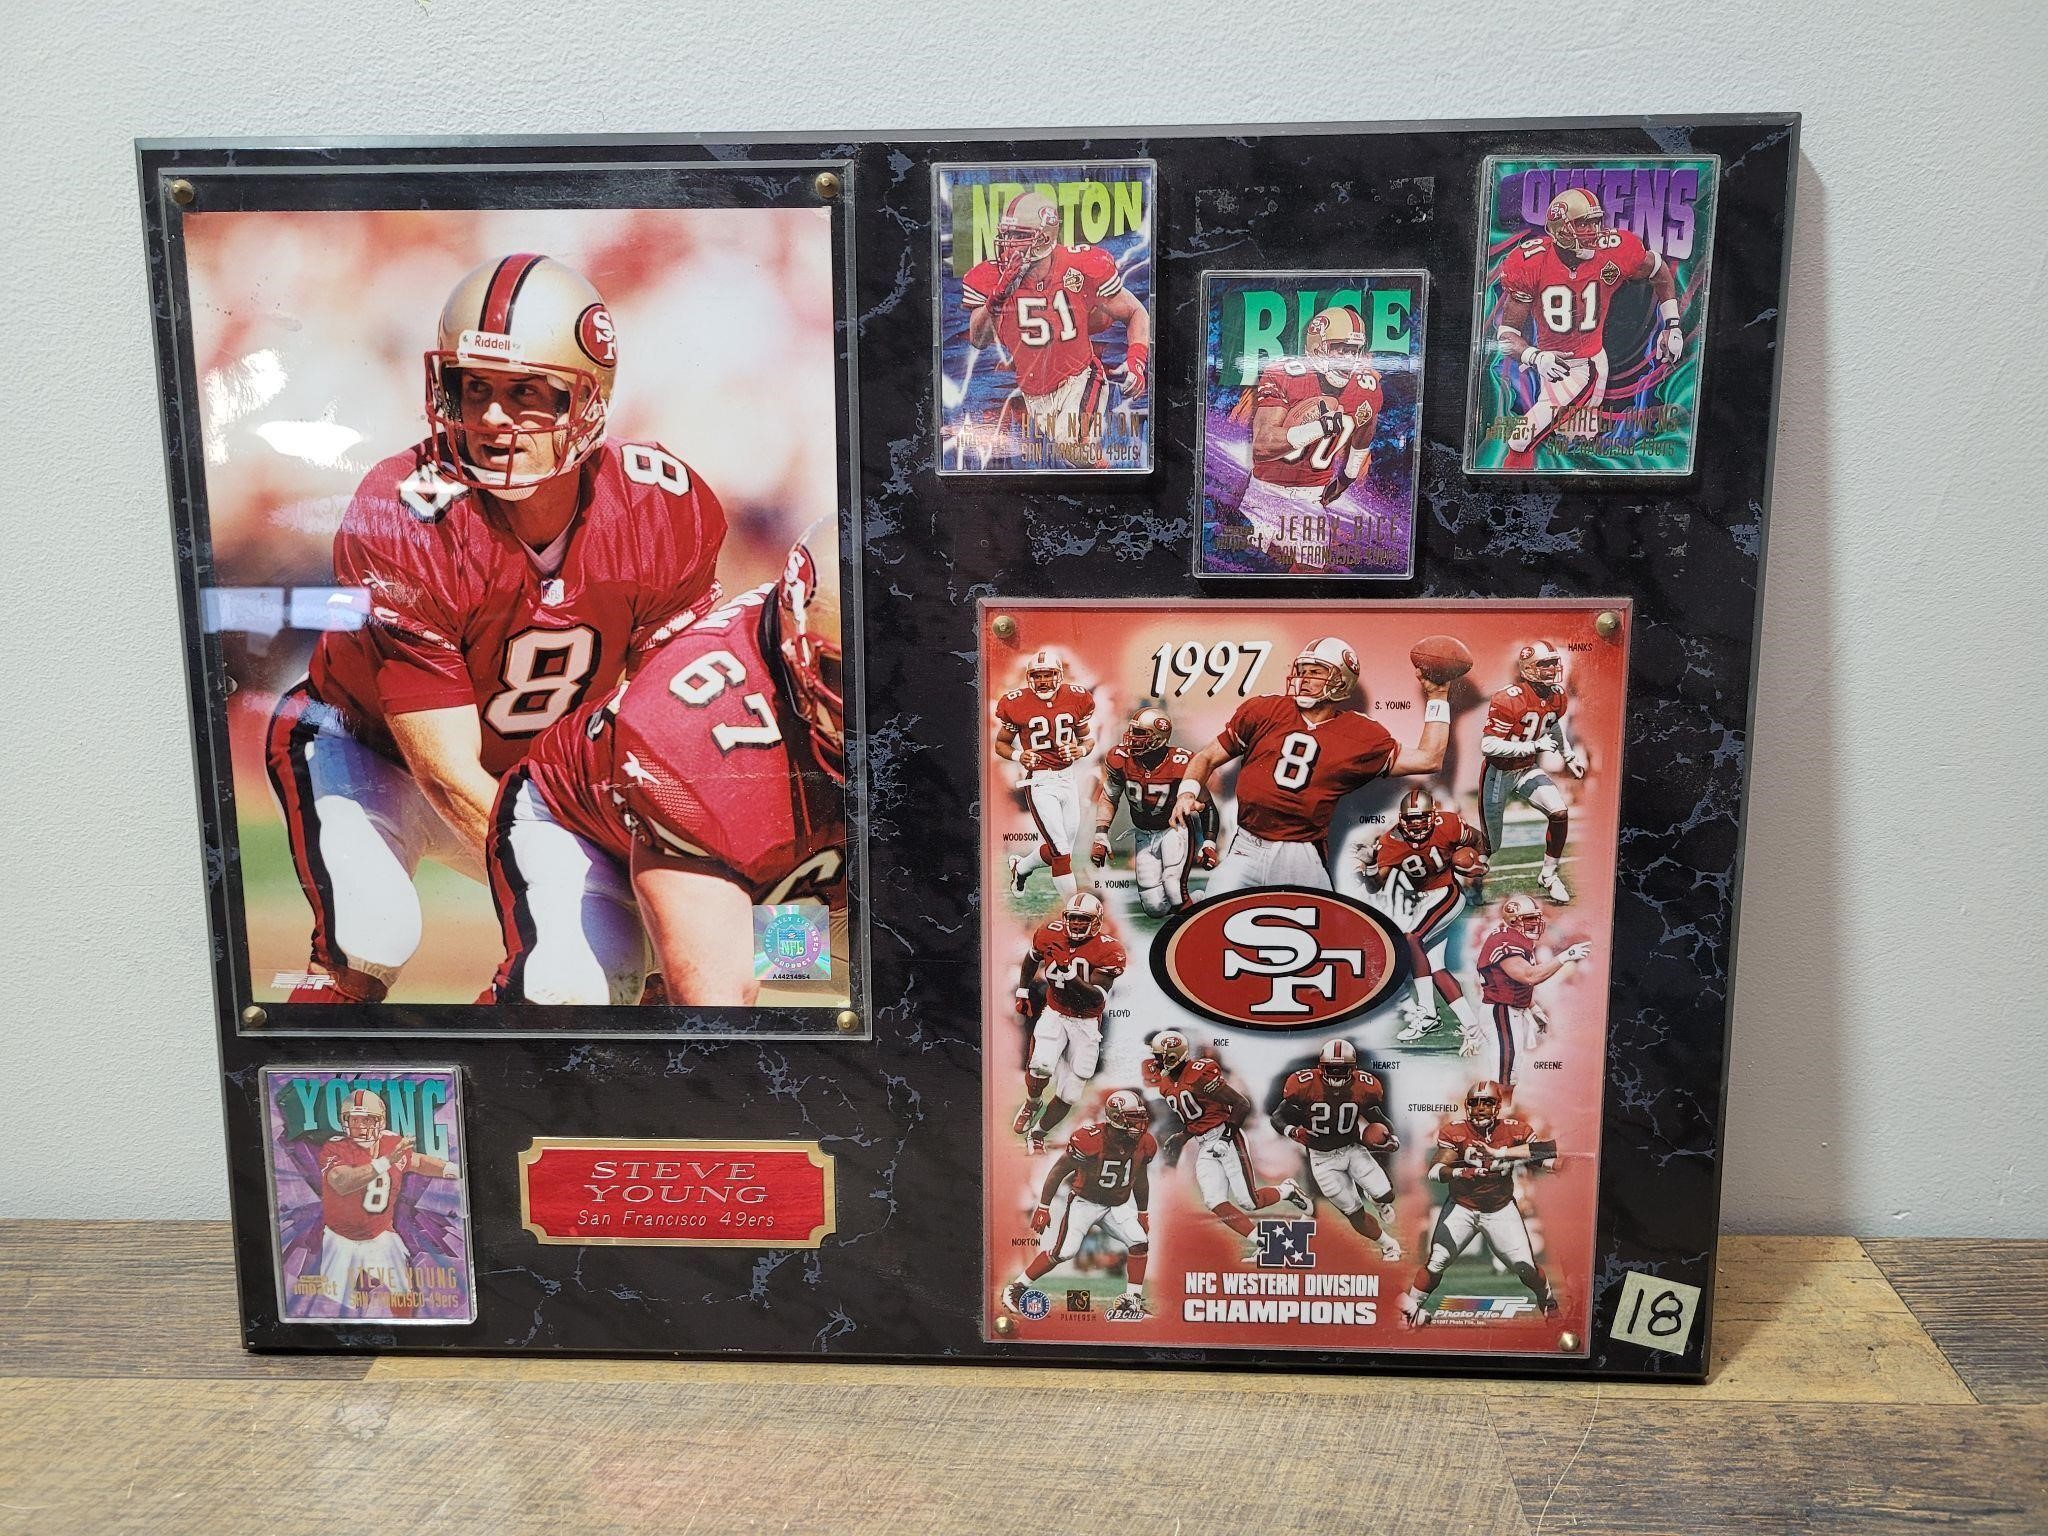 Steve Young SF 49ers Plaque